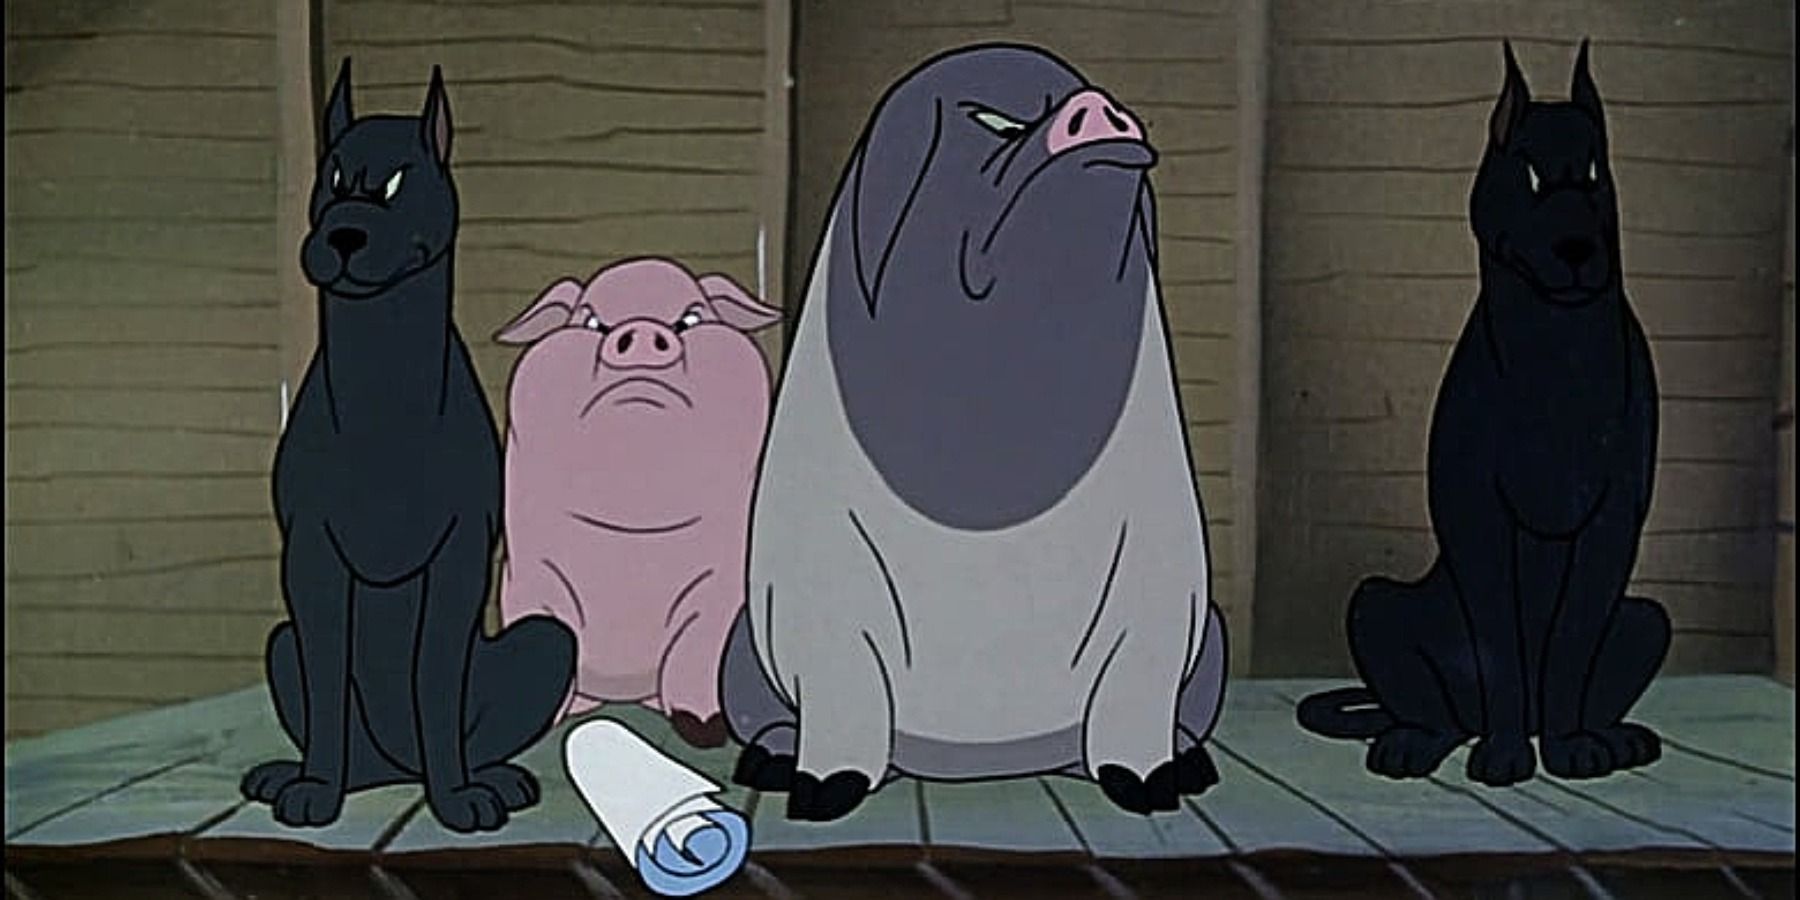 Animal farm pigs and dogs 1954 